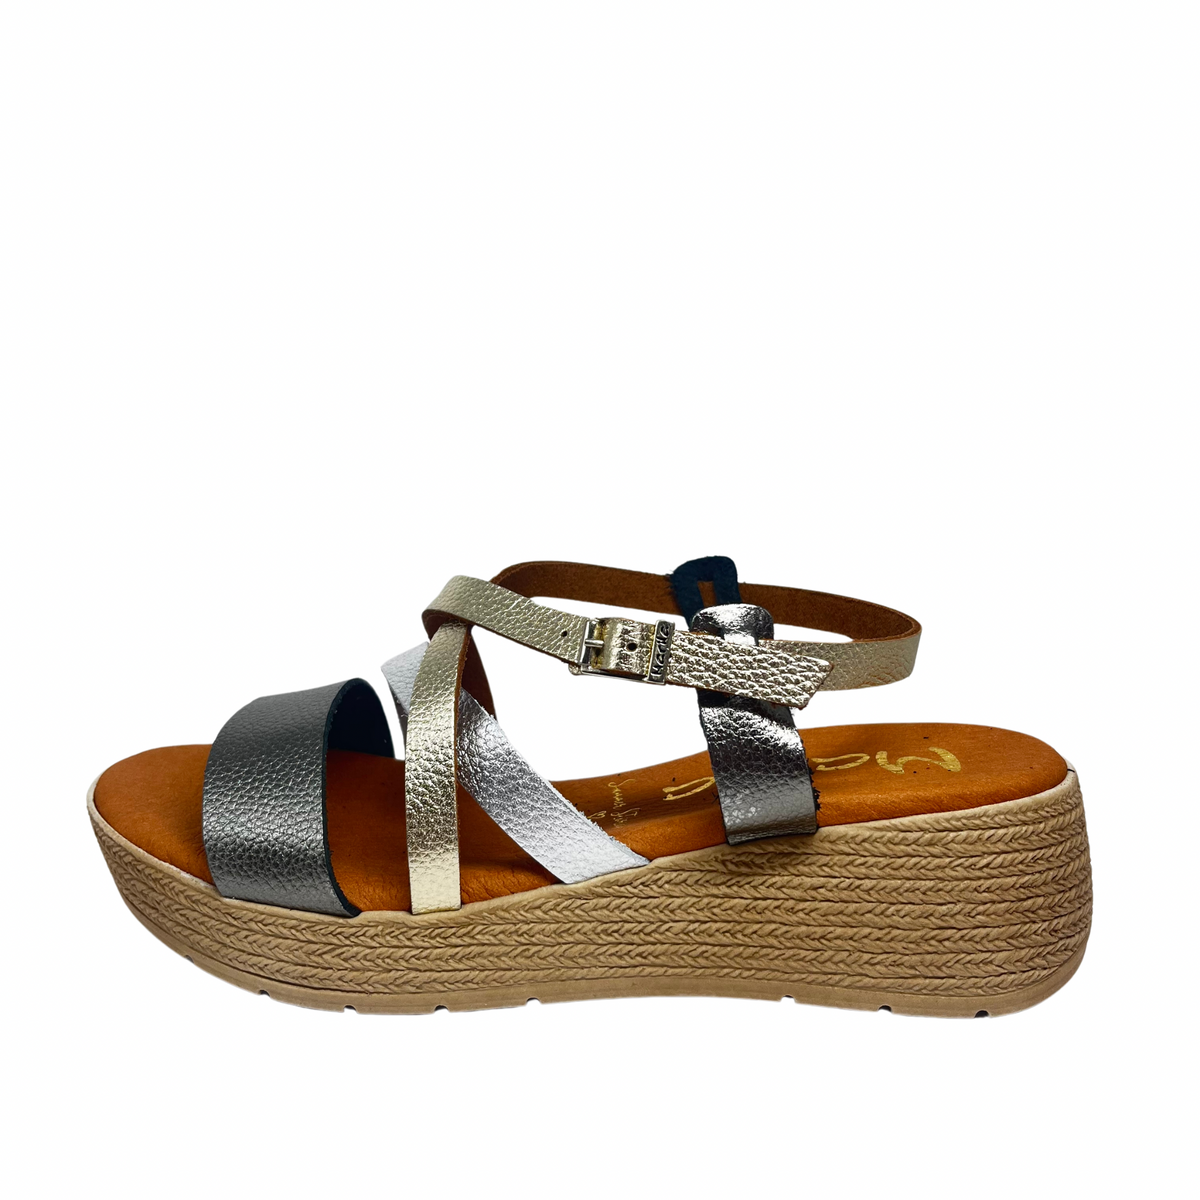 Marila Wedge Leather Sandal With Metallic Strap Details